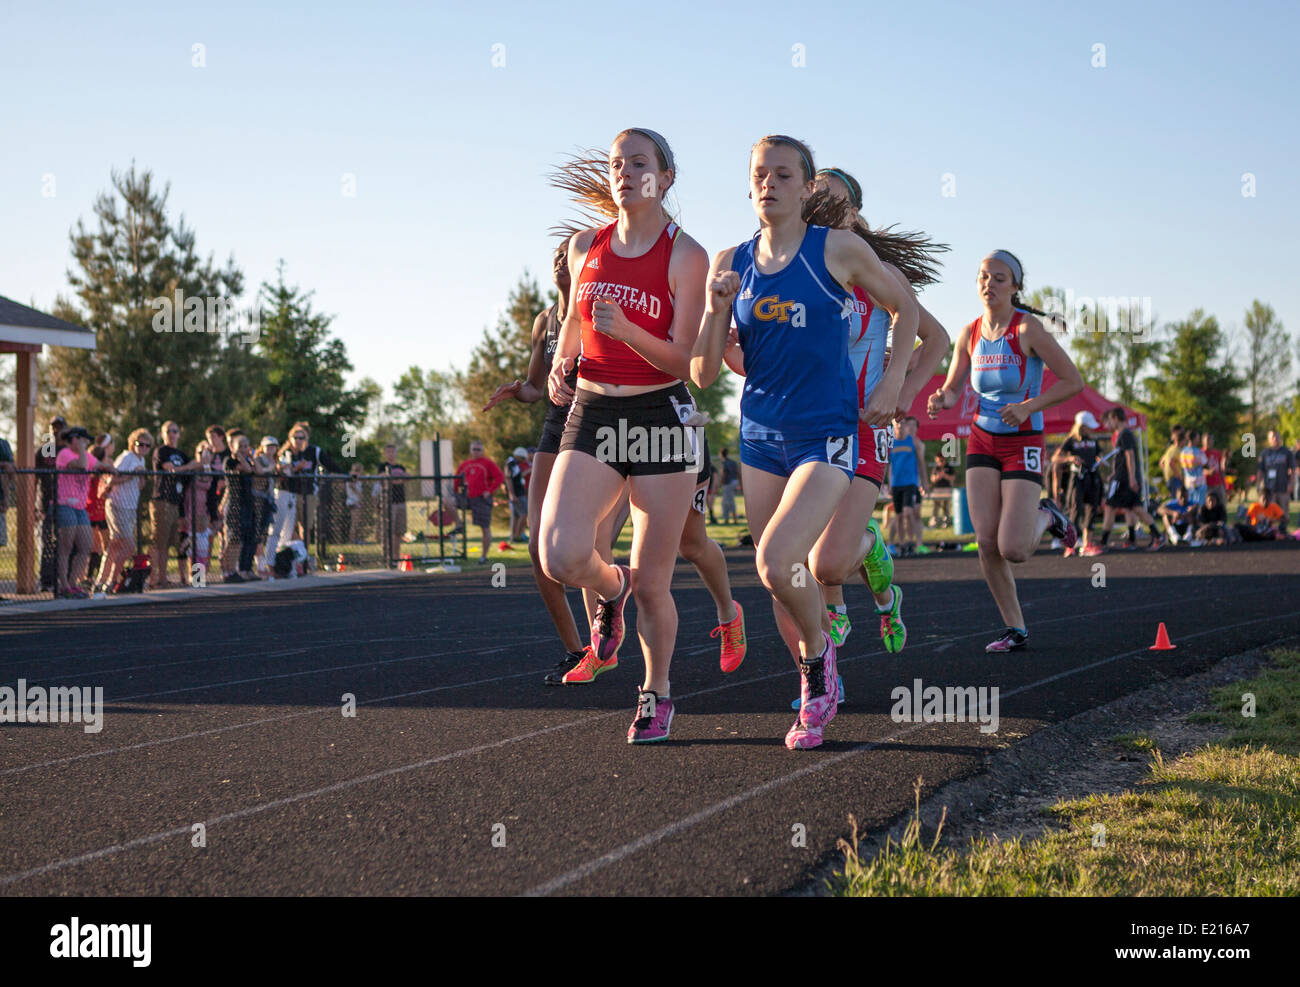 High school athletes compete in a track and field meet in Milwaukee, Wisconsin, USA. Stock Photo